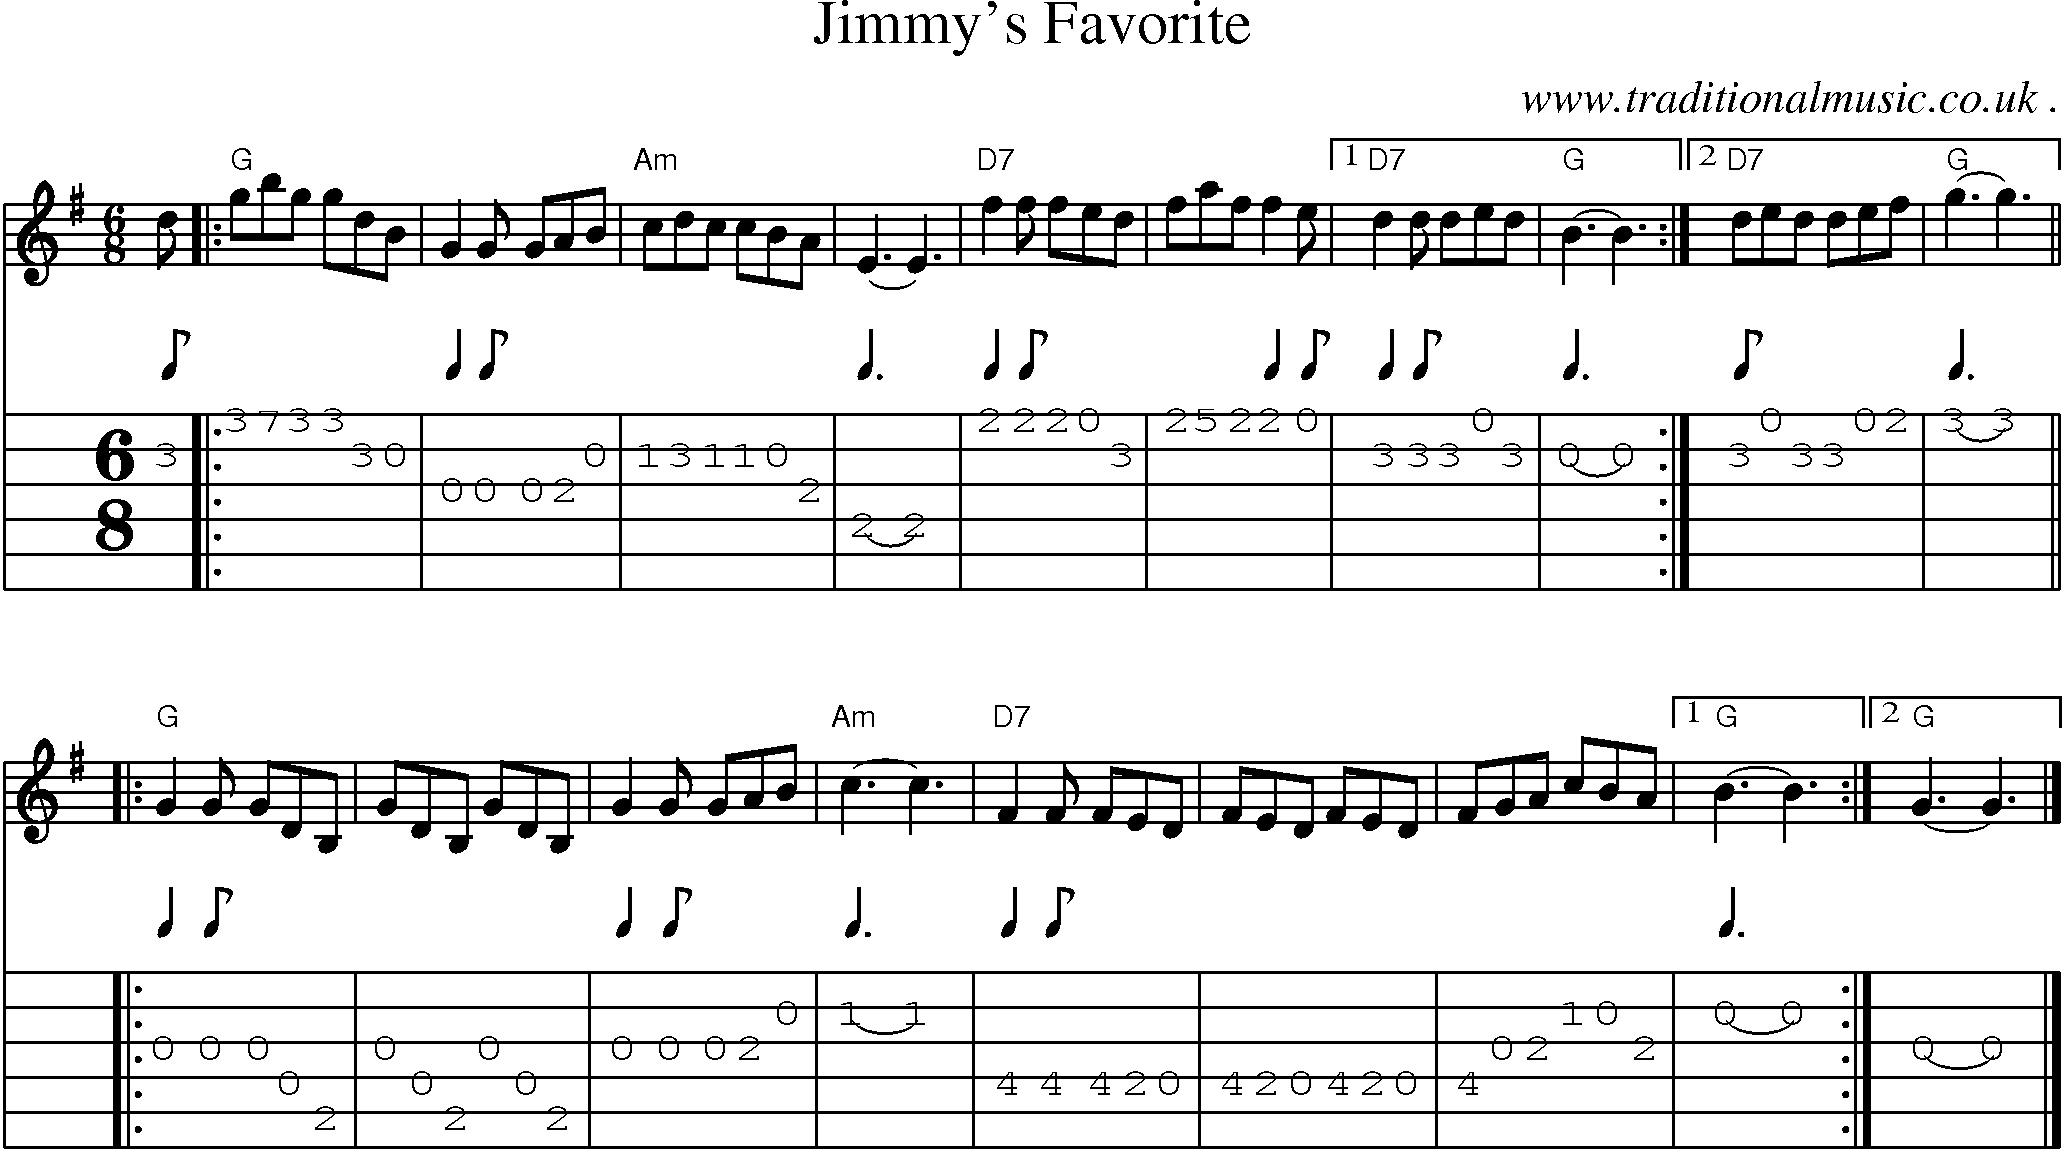 Sheet-music  score, Chords and Guitar Tabs for Jimmys Favorite